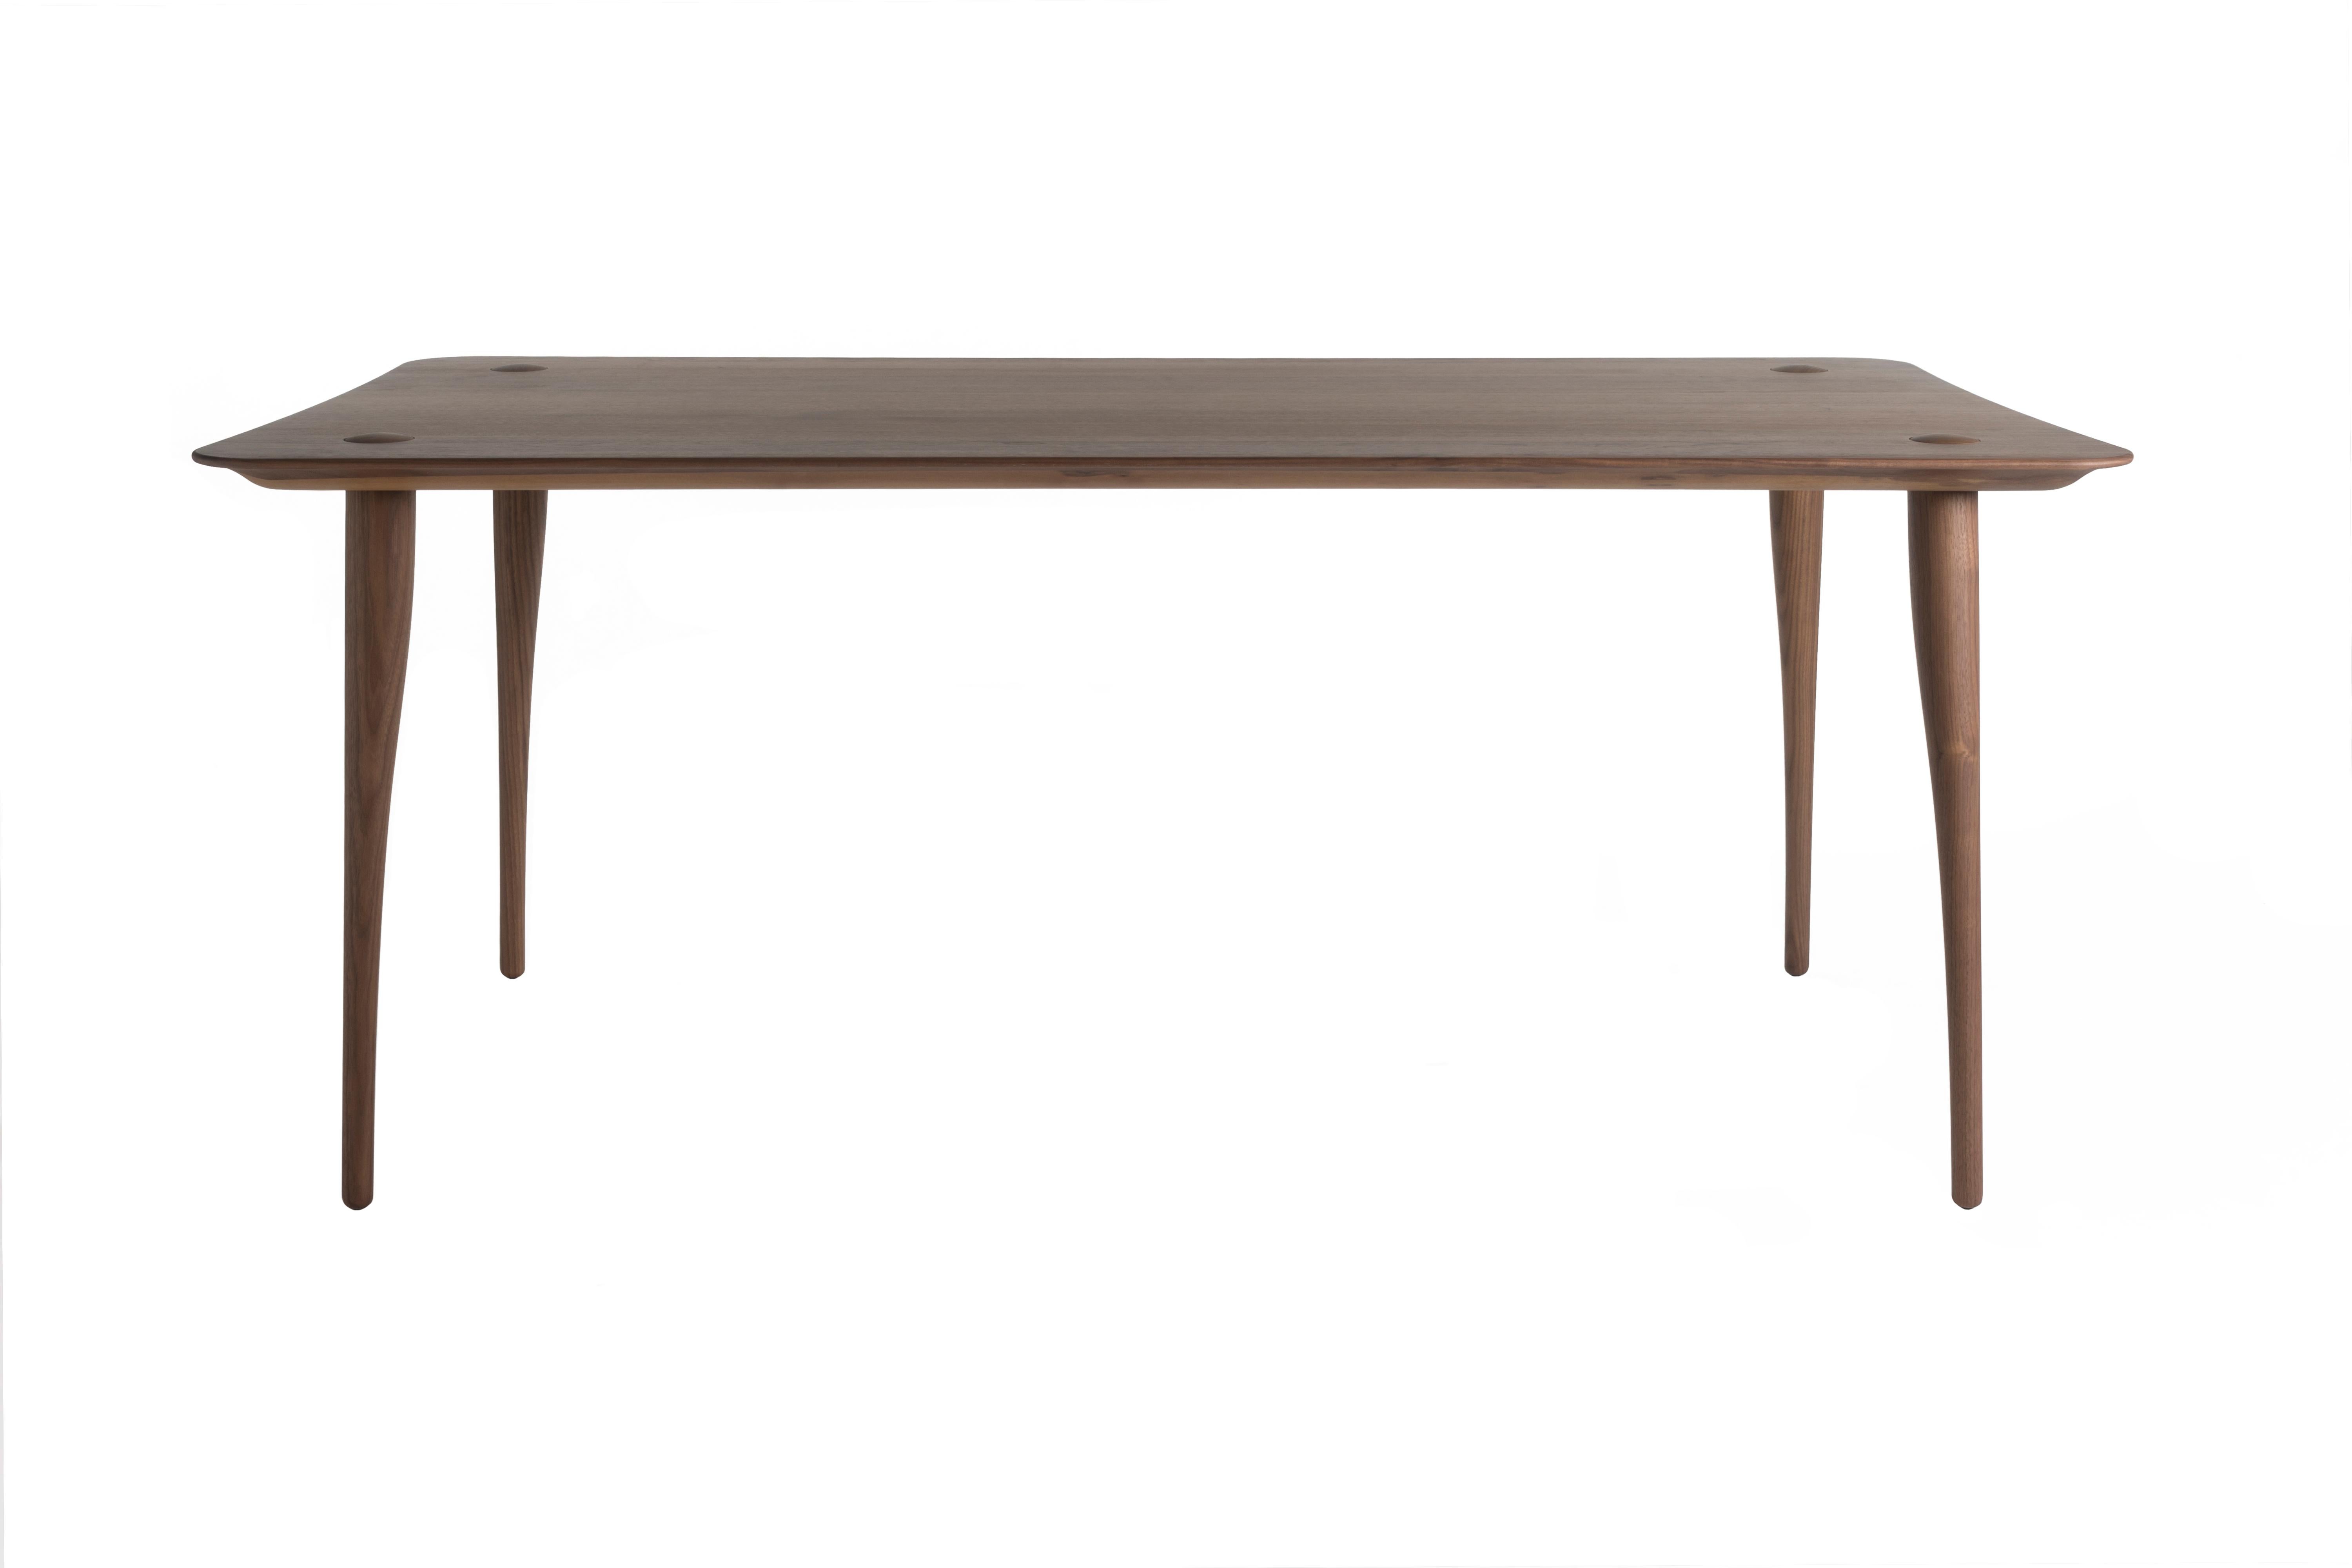 Dining at a Lewes dining table is one of the pleasures in life. We sit down with a glass of wine at a gently curved solid wood table. The wooden frame underneath the surface has 4 organic shaped legs which protrude elegantly through the surface of